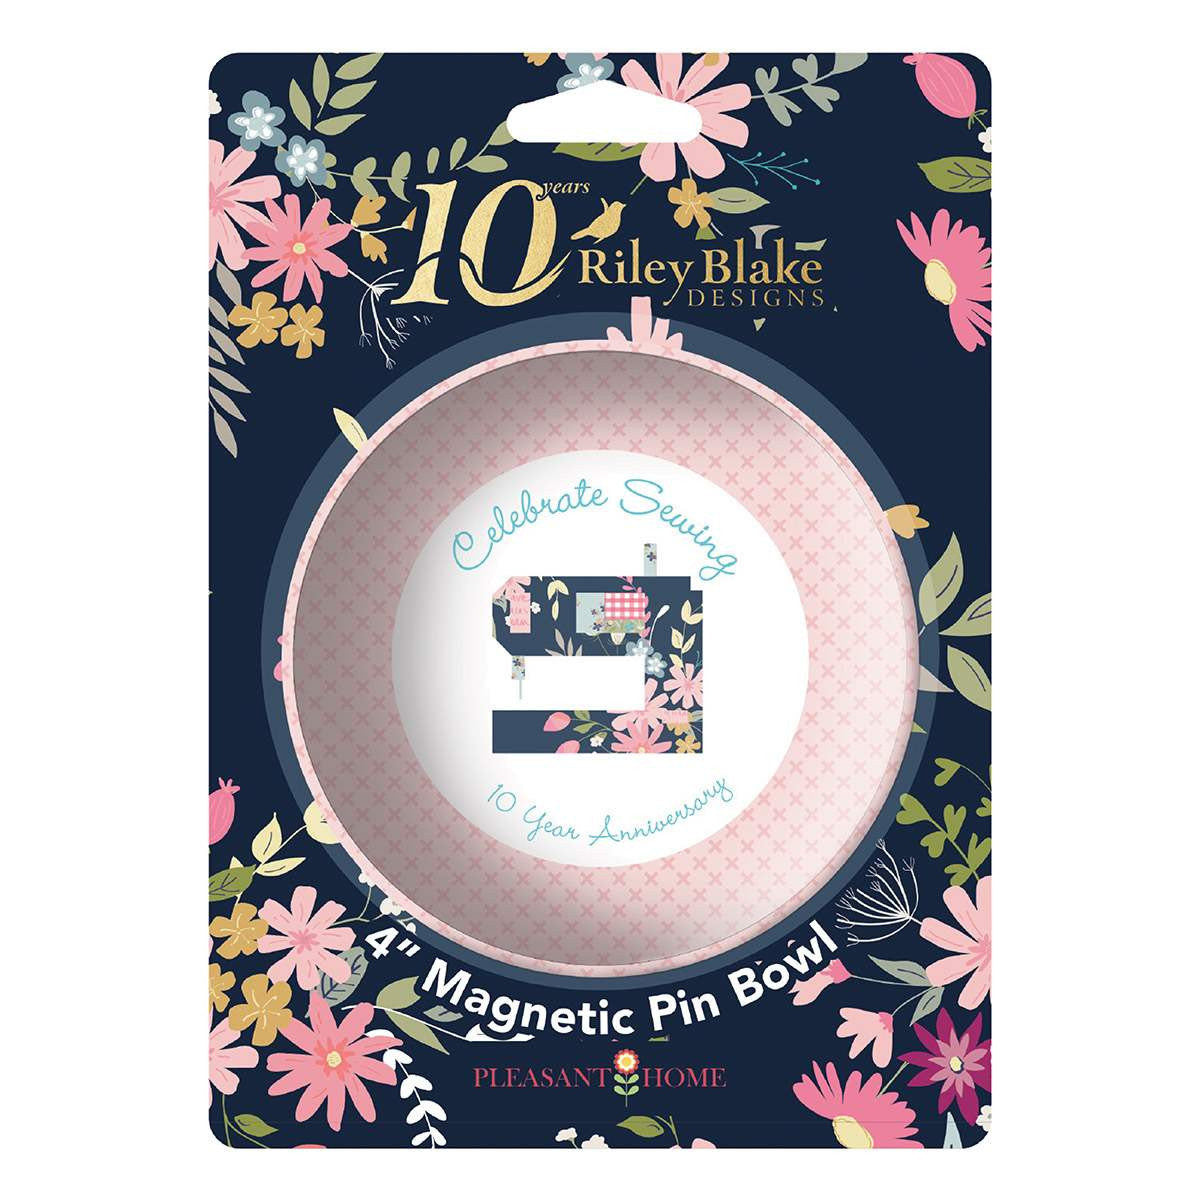 Magnetic Pin Bowl - Riley Blake Designs 10th Anniversary - Sewing Mach –  Stitches n Giggles